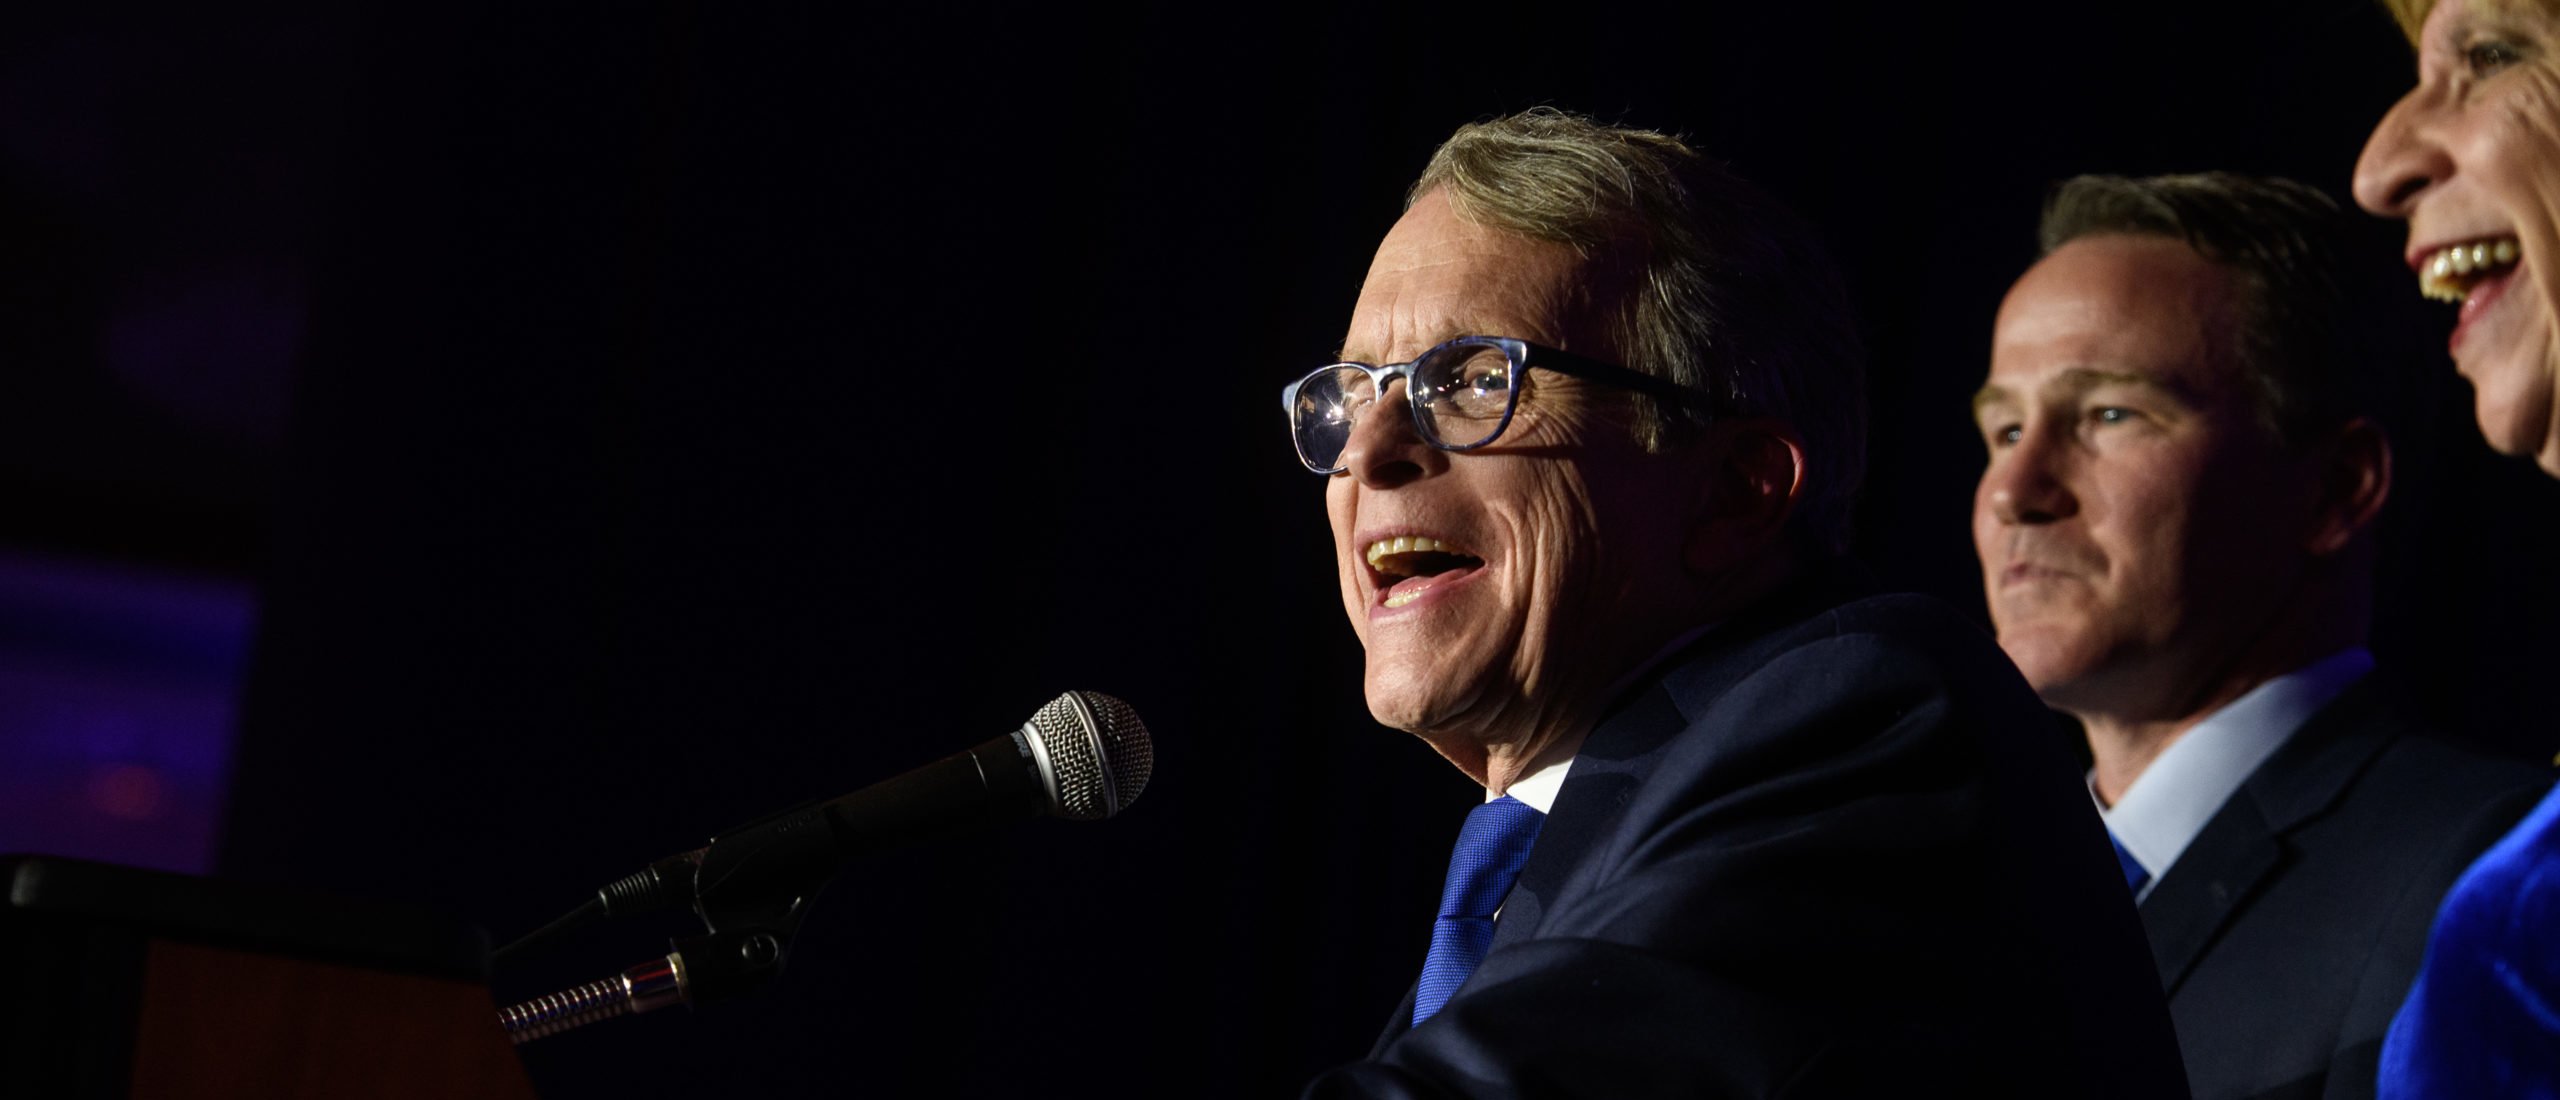 Republican Gubernatorial-elect Ohio Attorney General Mike DeWine gives his victory speech after winning the Ohio gubernatorial race at the Ohio Republican Party's election night party at the Sheraton Capitol Square on November 6, 2018 in Columbus, Ohio.